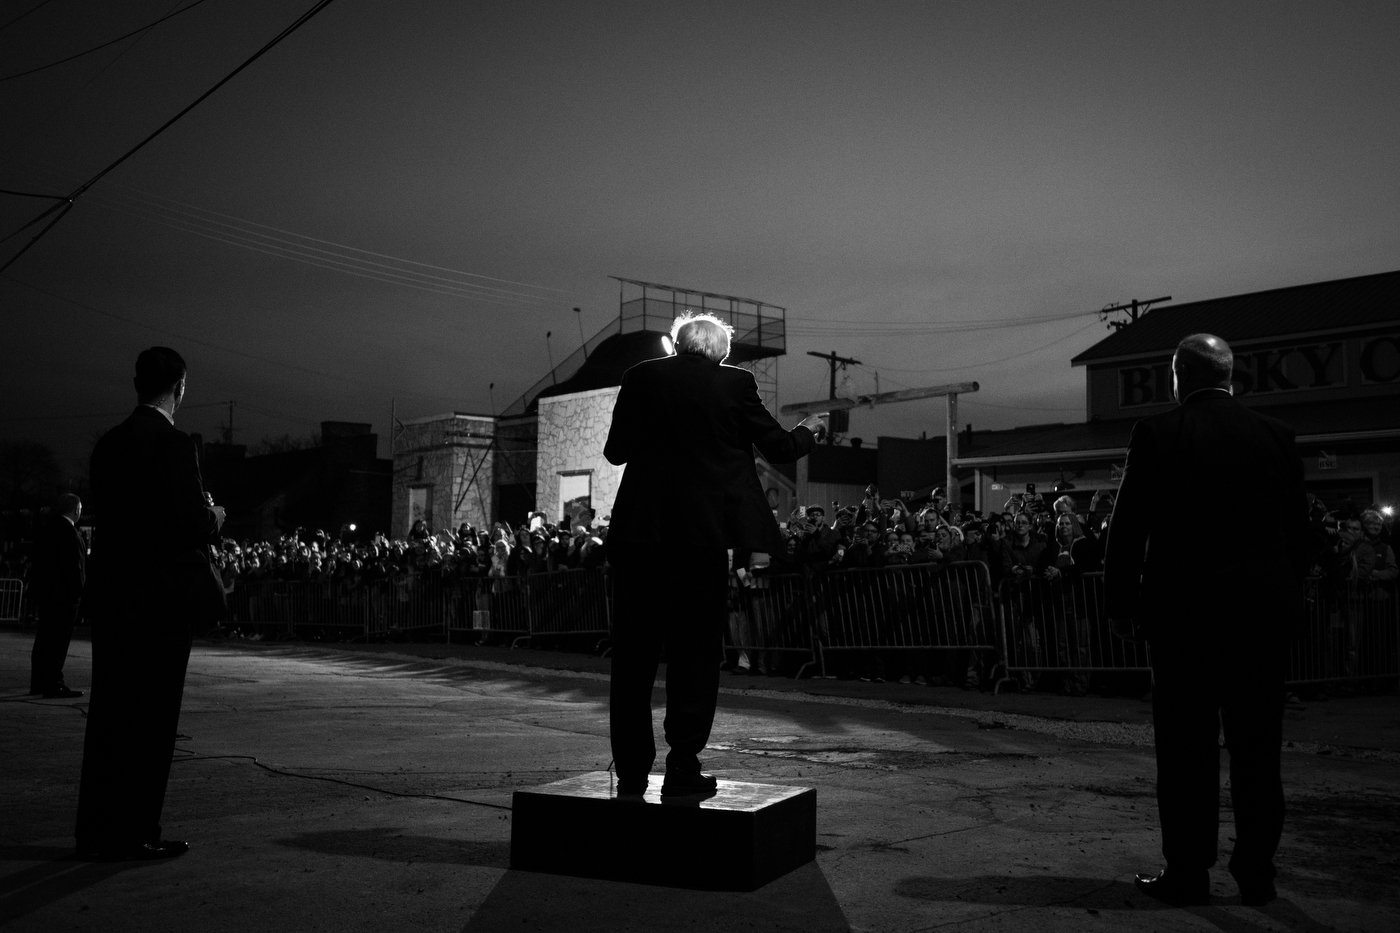  Democratic presidential candidate Bernie Sanders speaks to the overflow crowd at a campaign rally in Milwaukee, Wisconsin on March 29, 2016.&nbsp; 